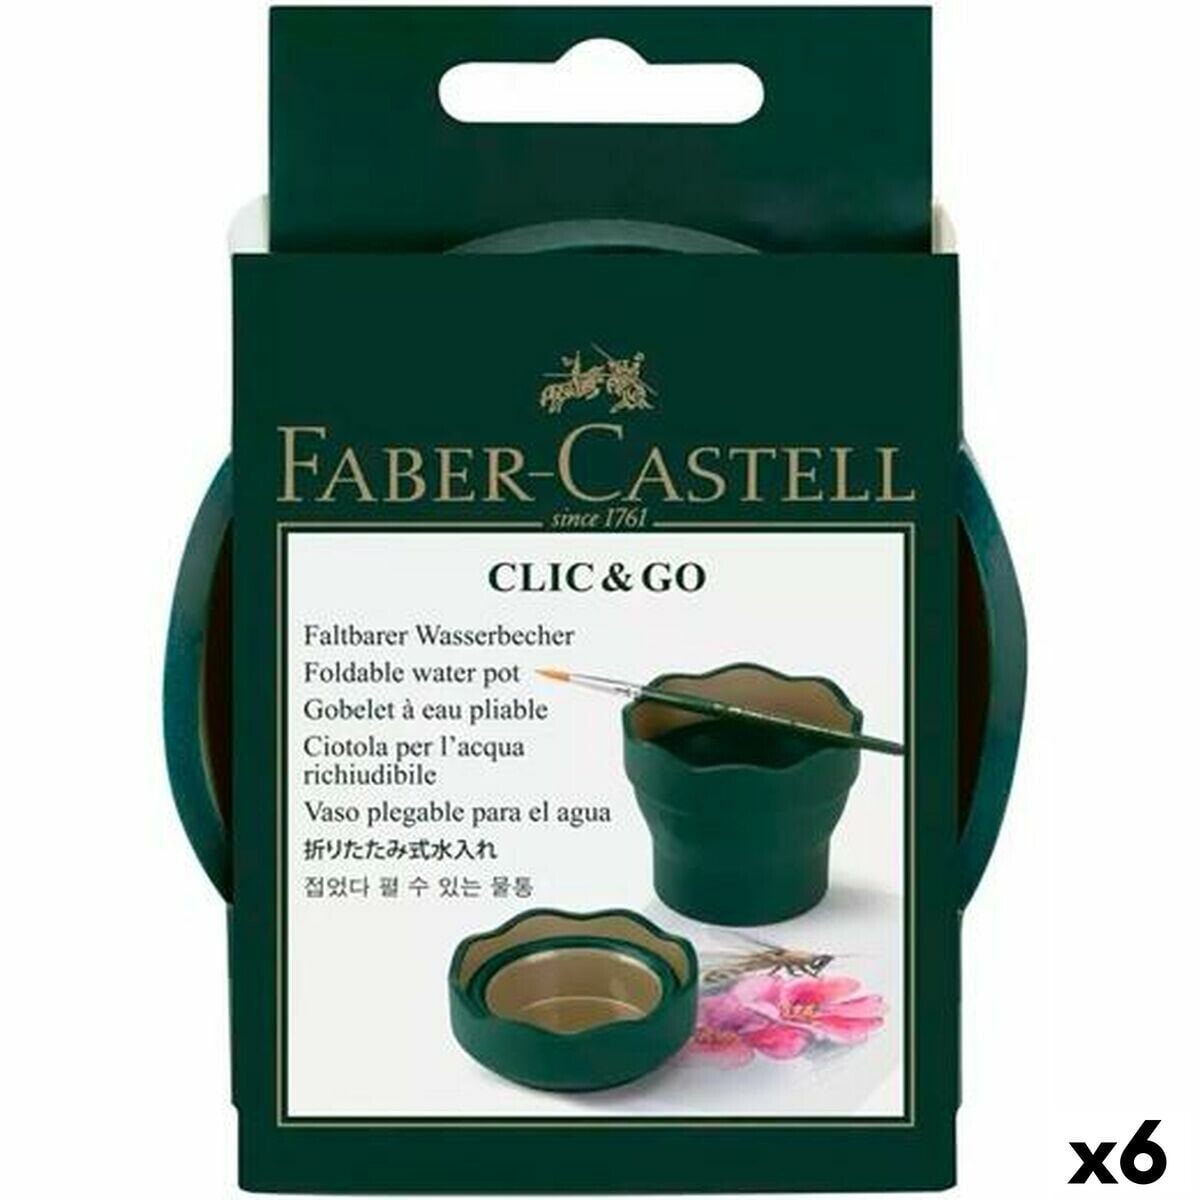 Glass Faber-Castell Clic & Go Foldable Dark green 6 Pieces